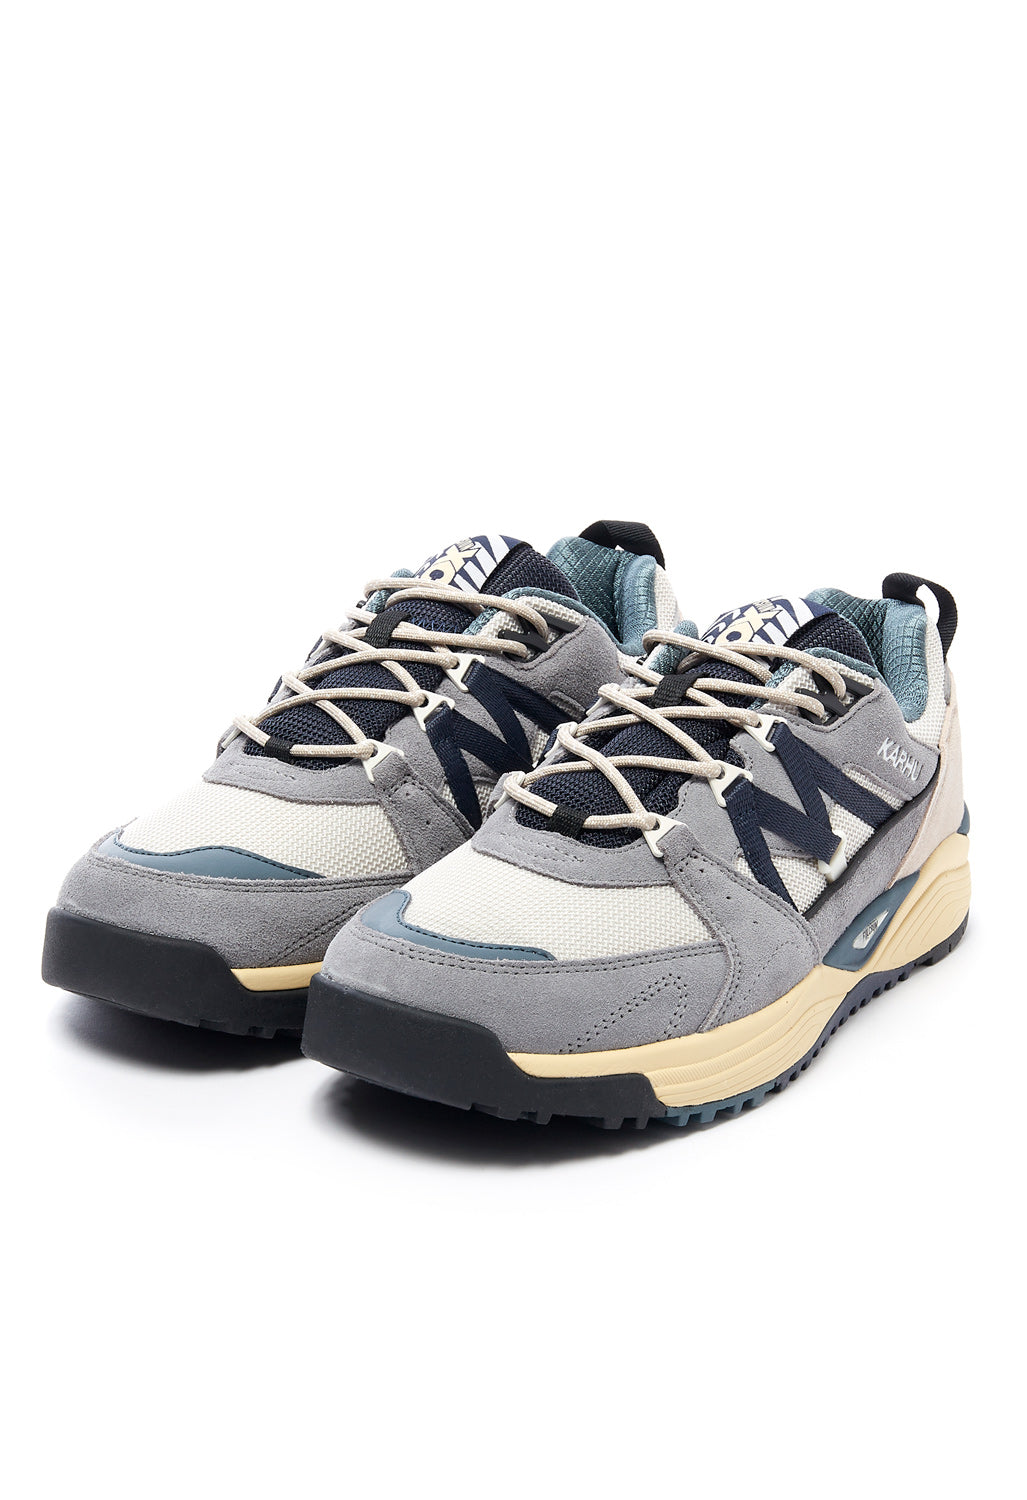 Karhu Fusion XC Trainers - Ultimate Gray / India Ink